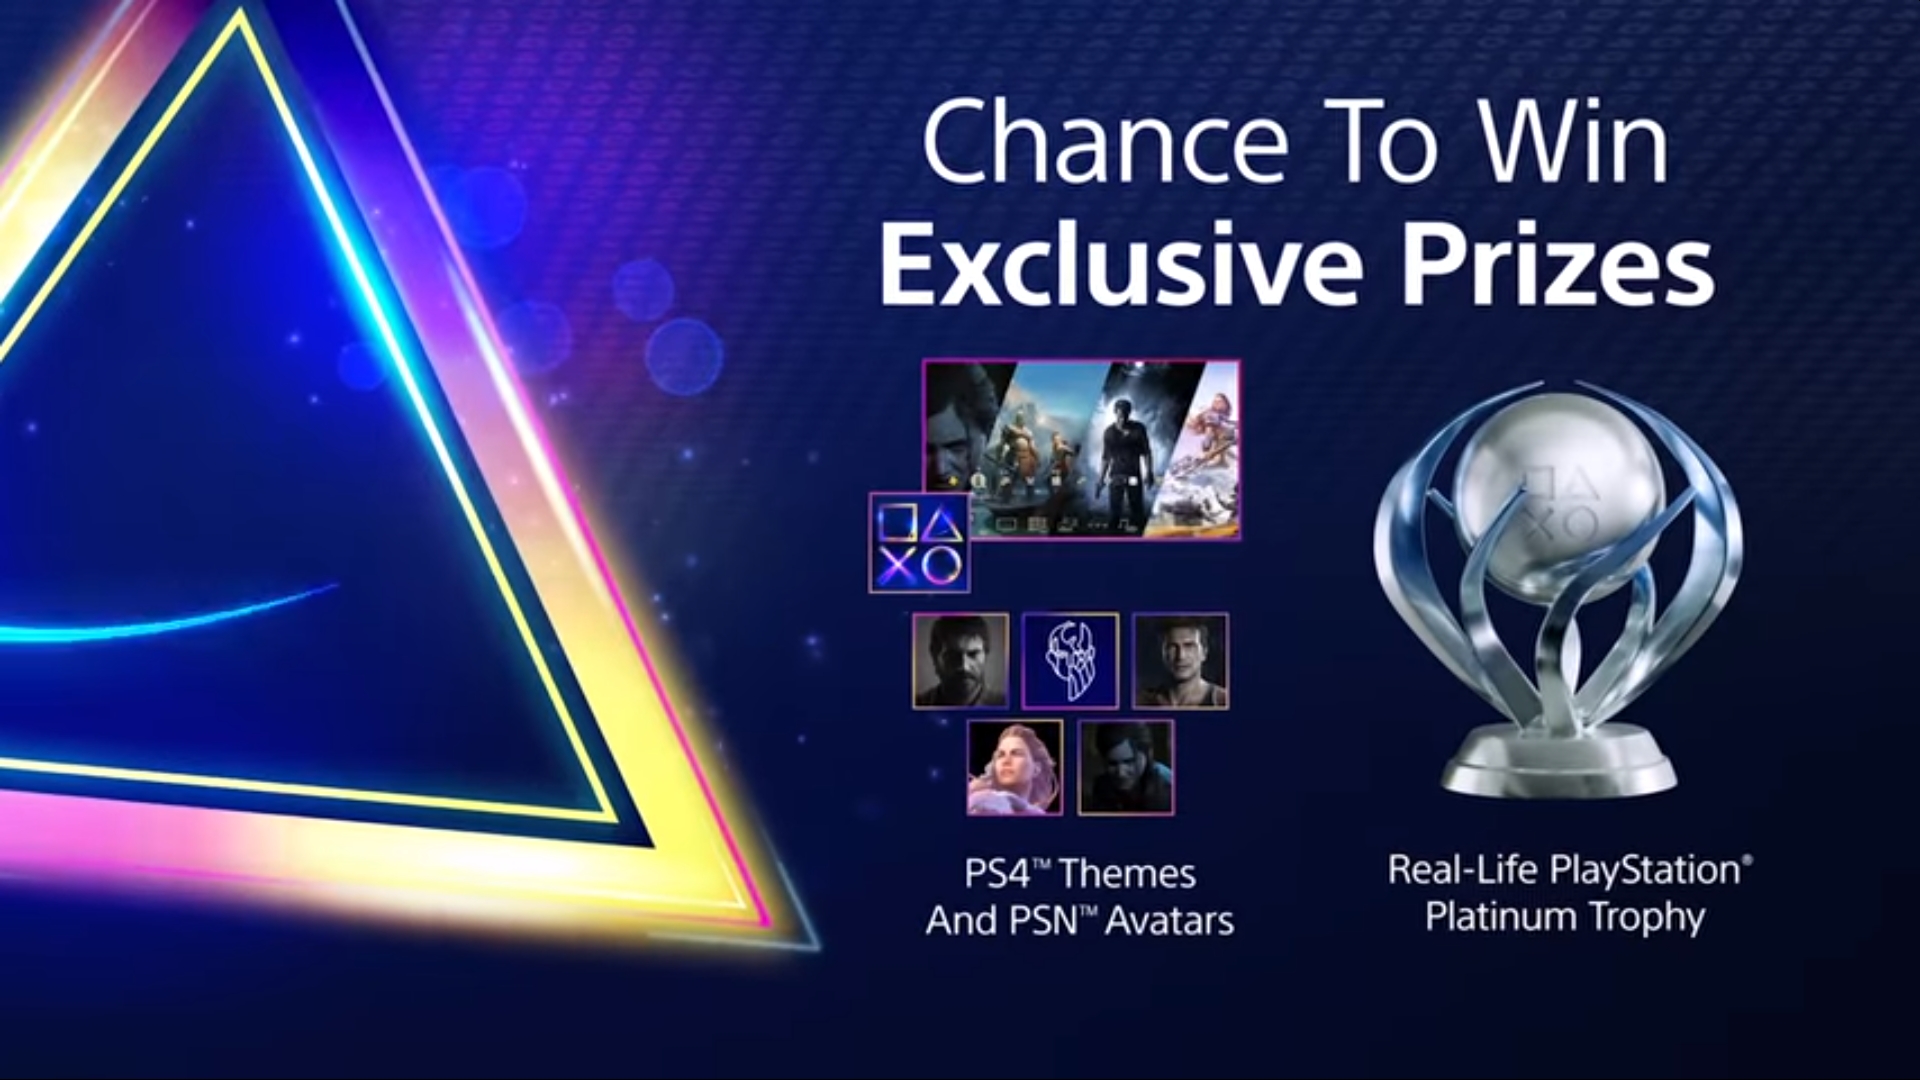 PlayStation Player Celebration to Reward With Exclusive